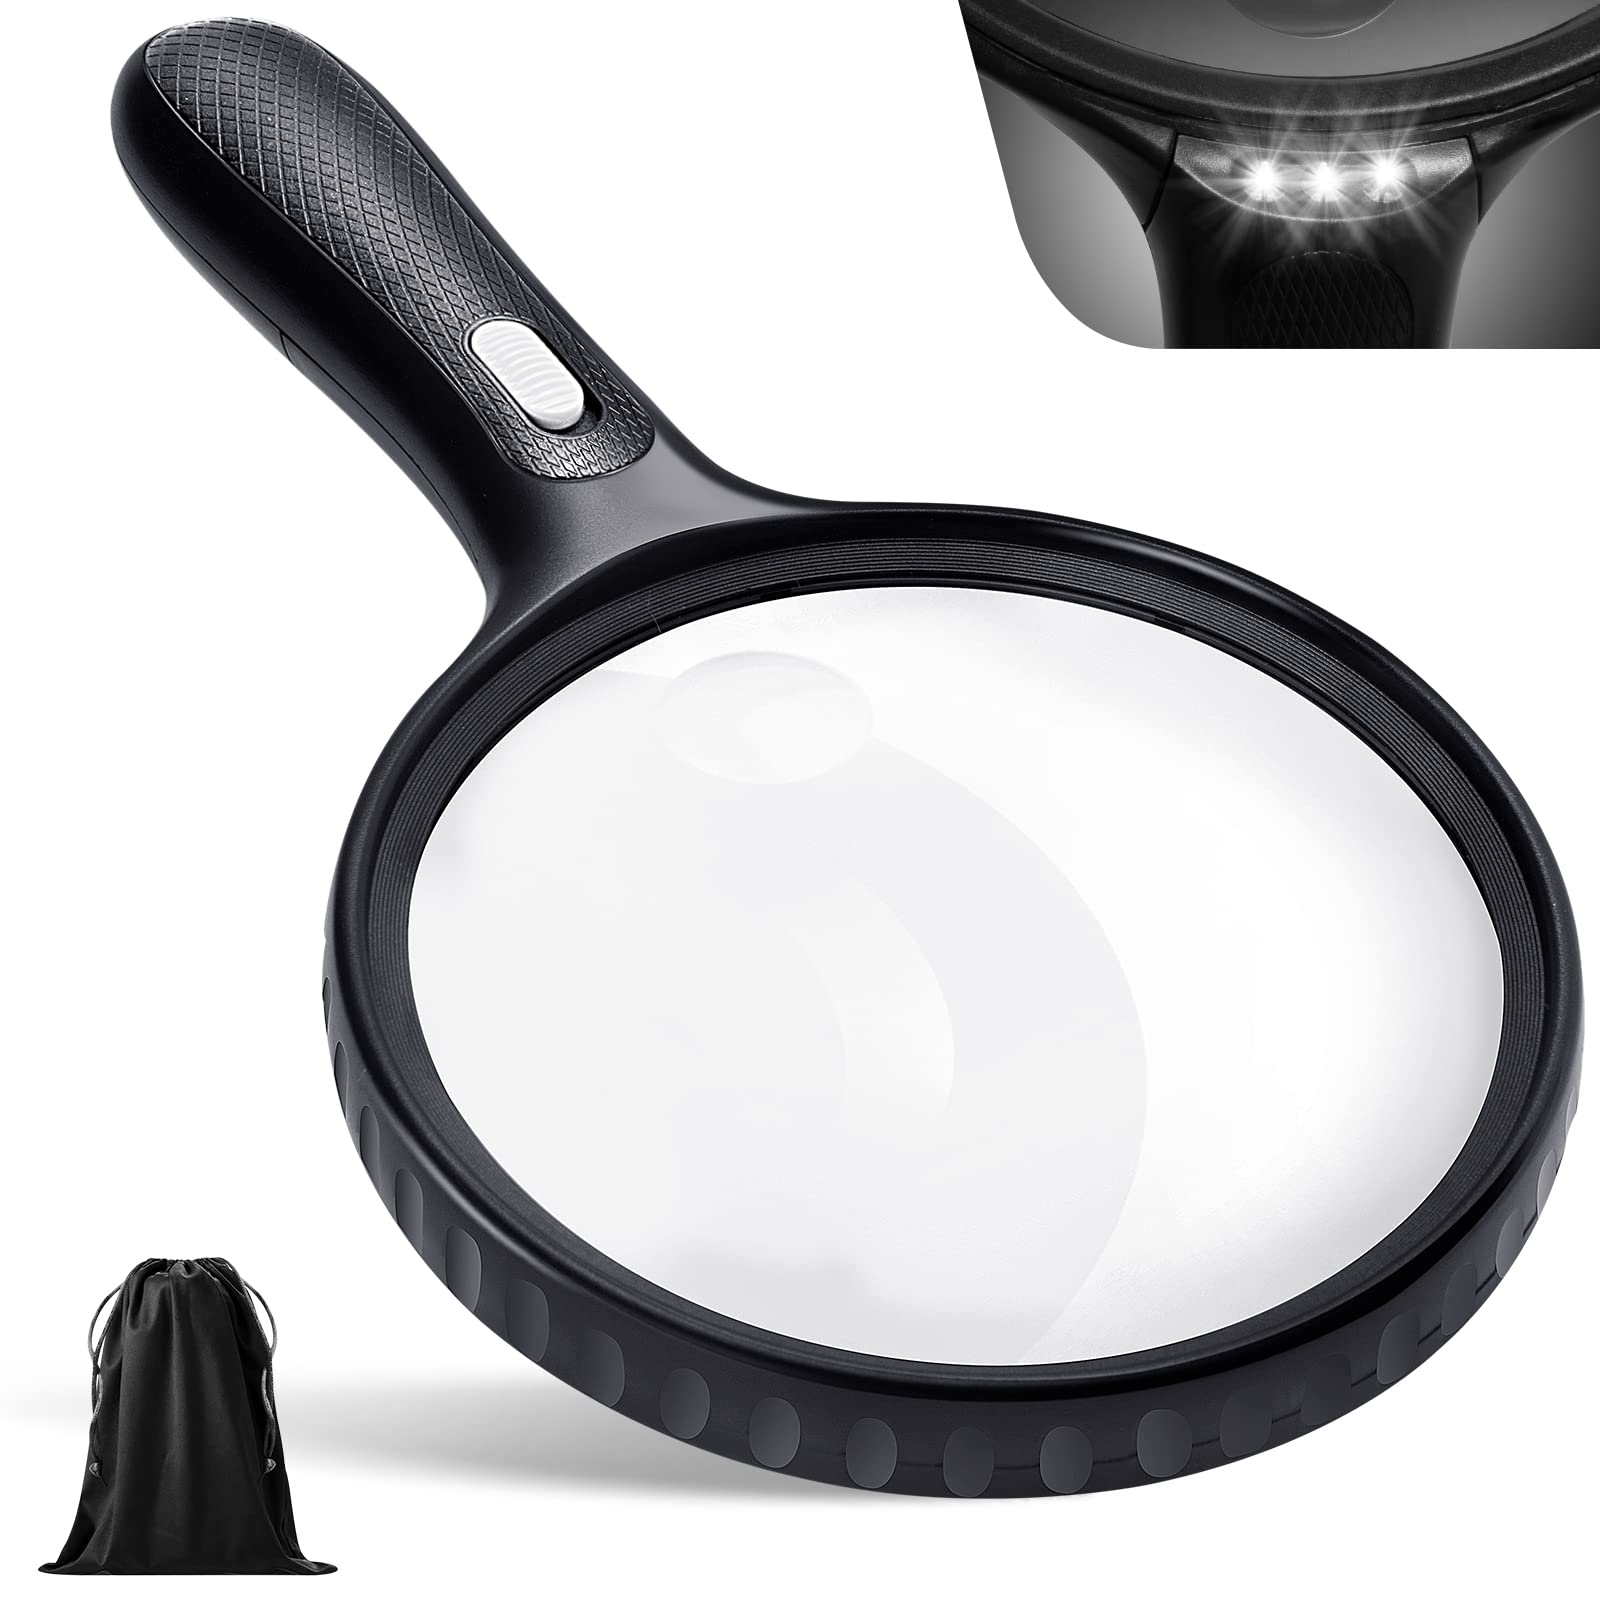 5.5 inch extra large magnifying glass